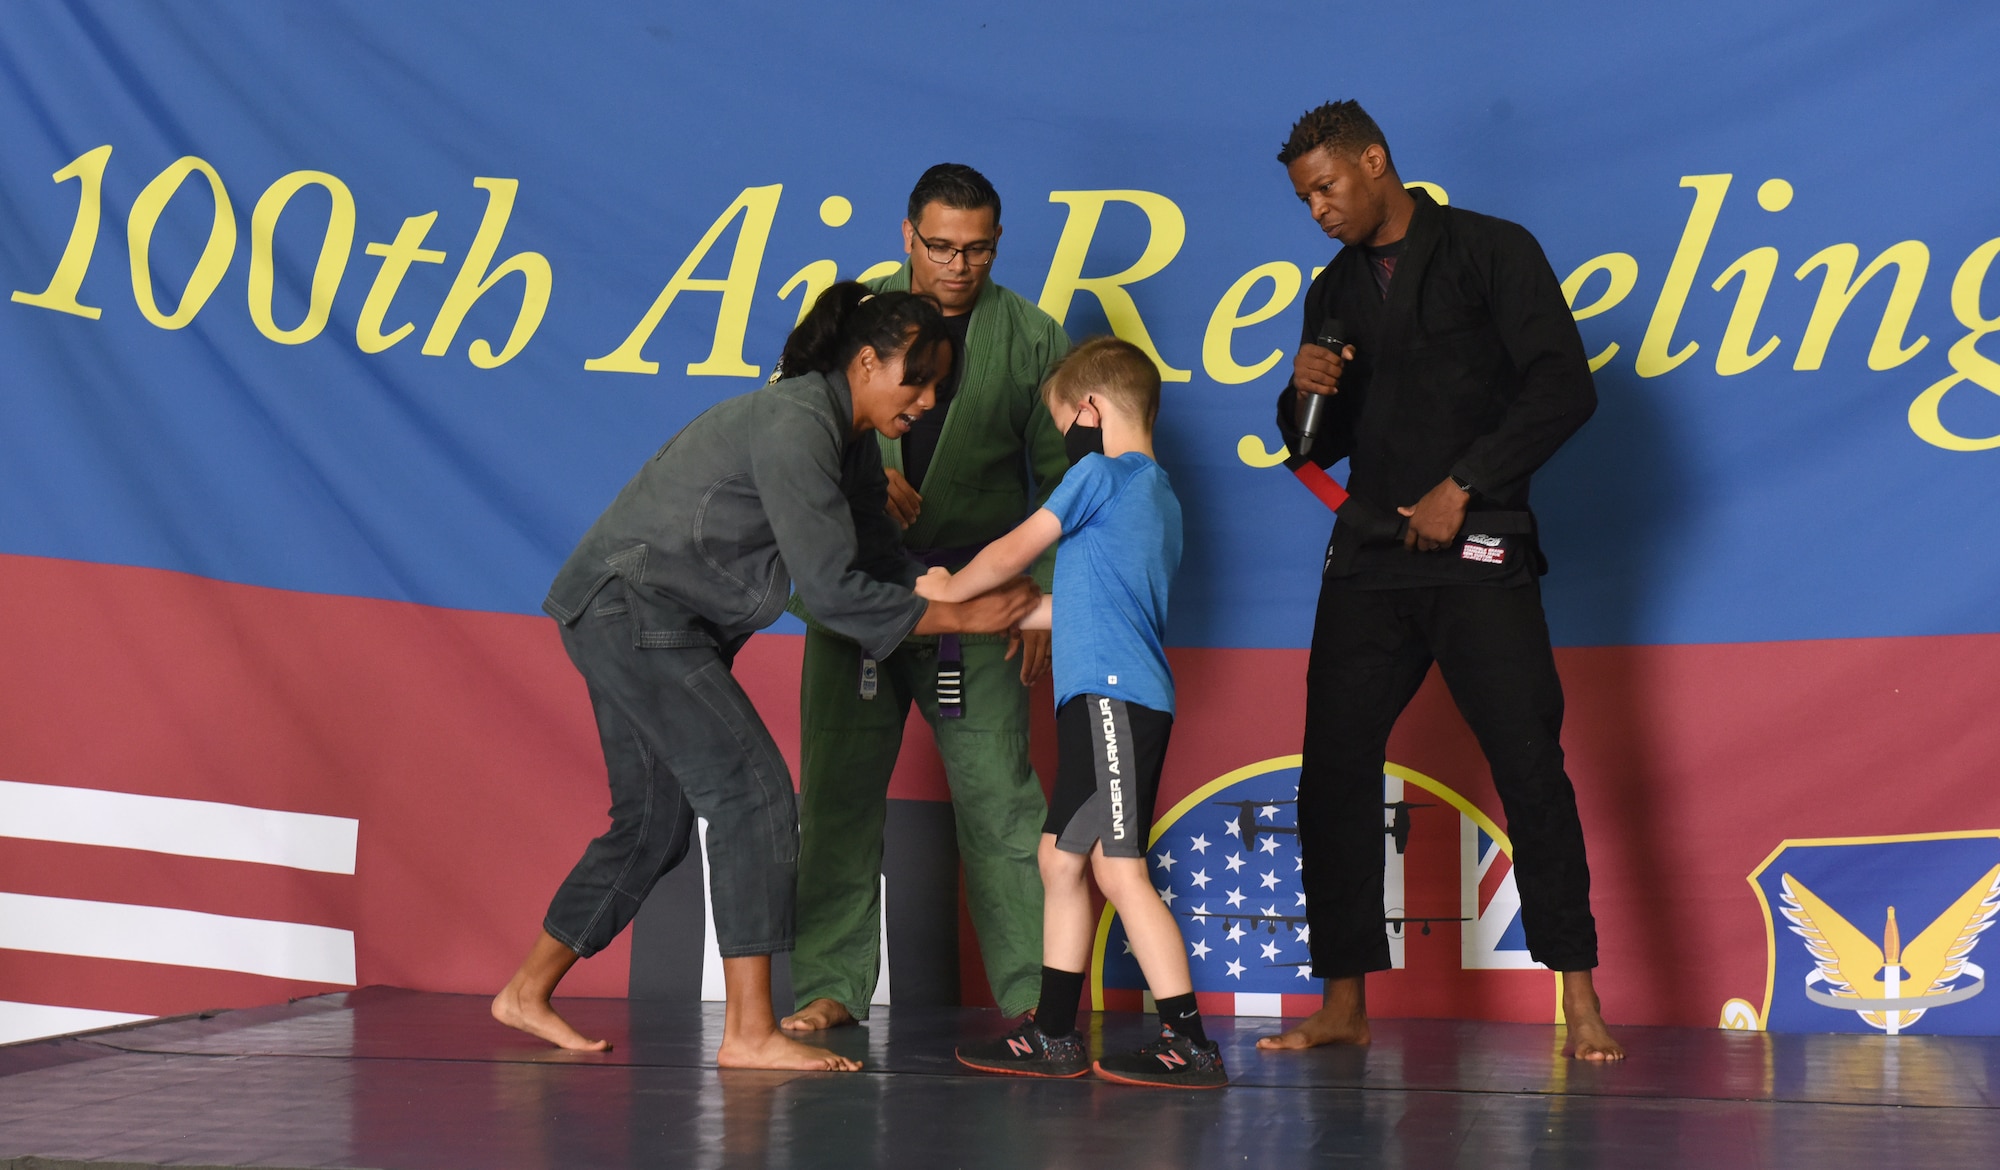 Lincoln Glascock, center, son of Chief Master Sgt. Kathi Glascock, takes a turn to participate in the Jiujitsu demonstration during Diversity and Inclusion Day at Royal Air Force Mildenhall, England, Aug. 13, 2021. The event included a variety of performances, food and informational booths, a fire truck, Humvee and various static aircraft. (U.S. Air Force photo by Karen Abeyasekere)